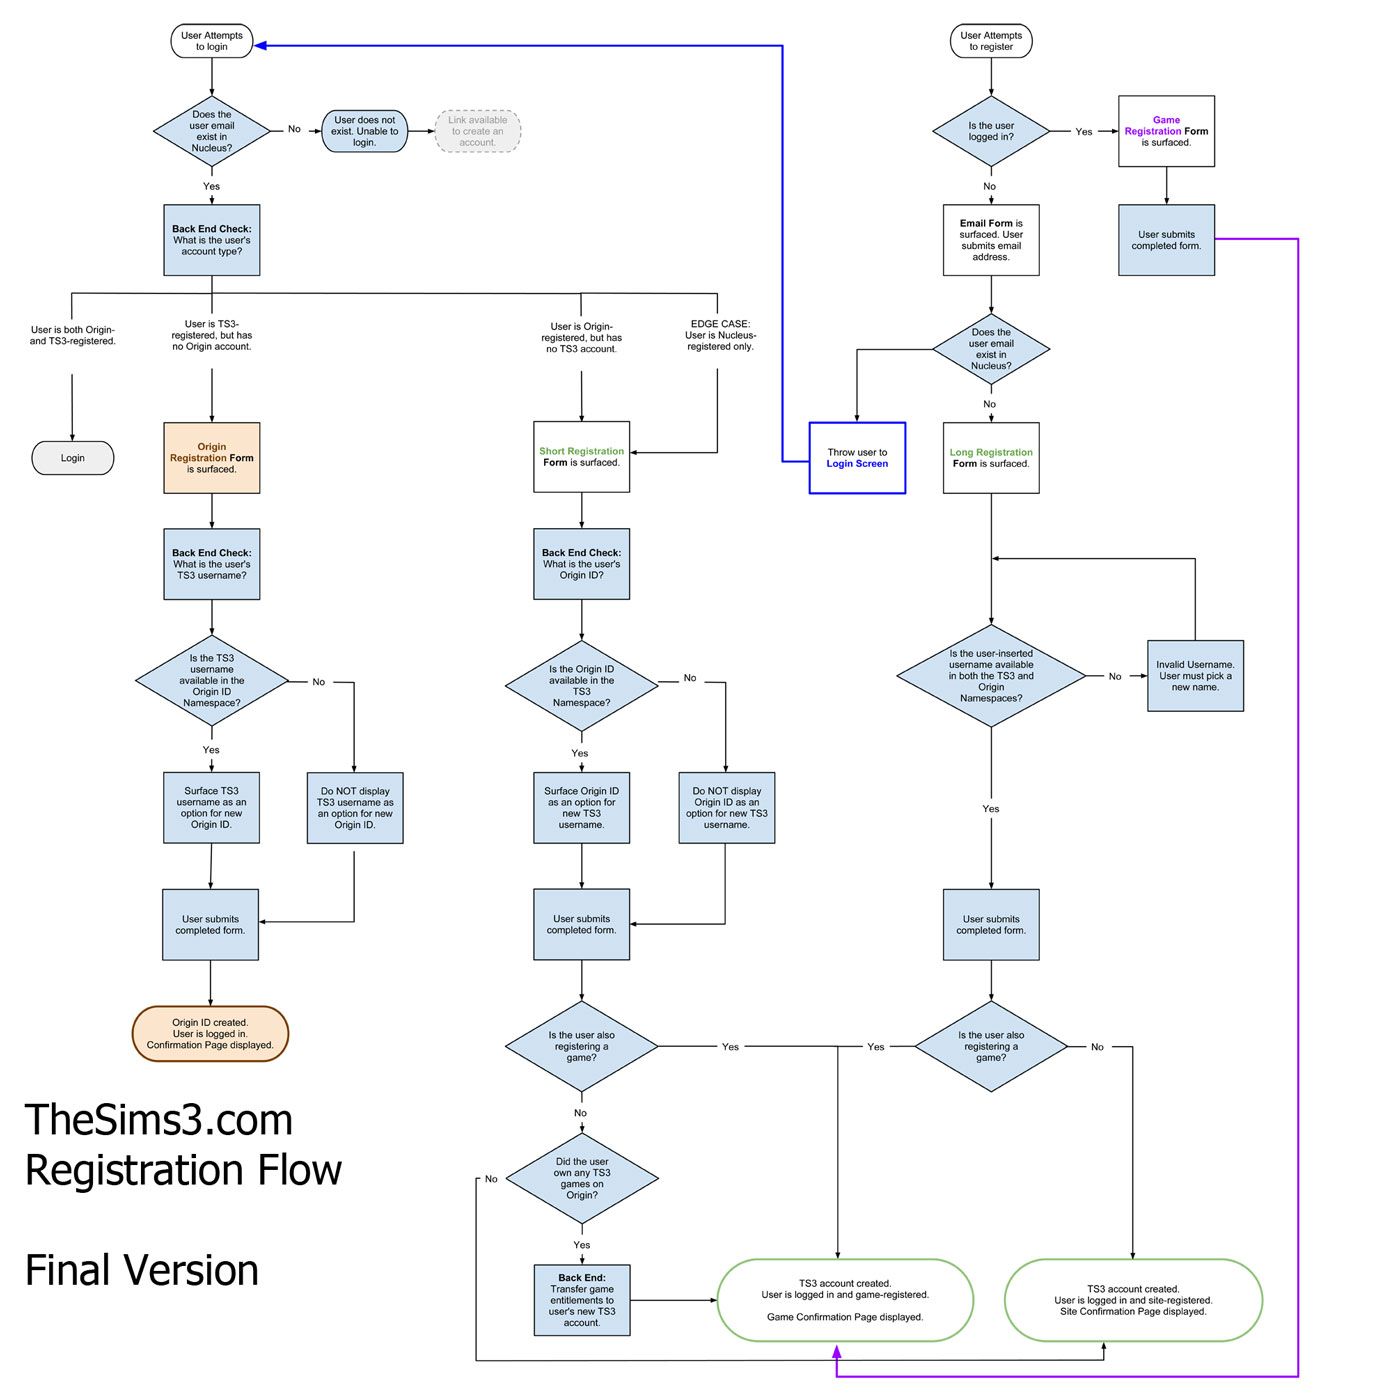 flow chart of final version which streamlines the previous registration into fewer steps